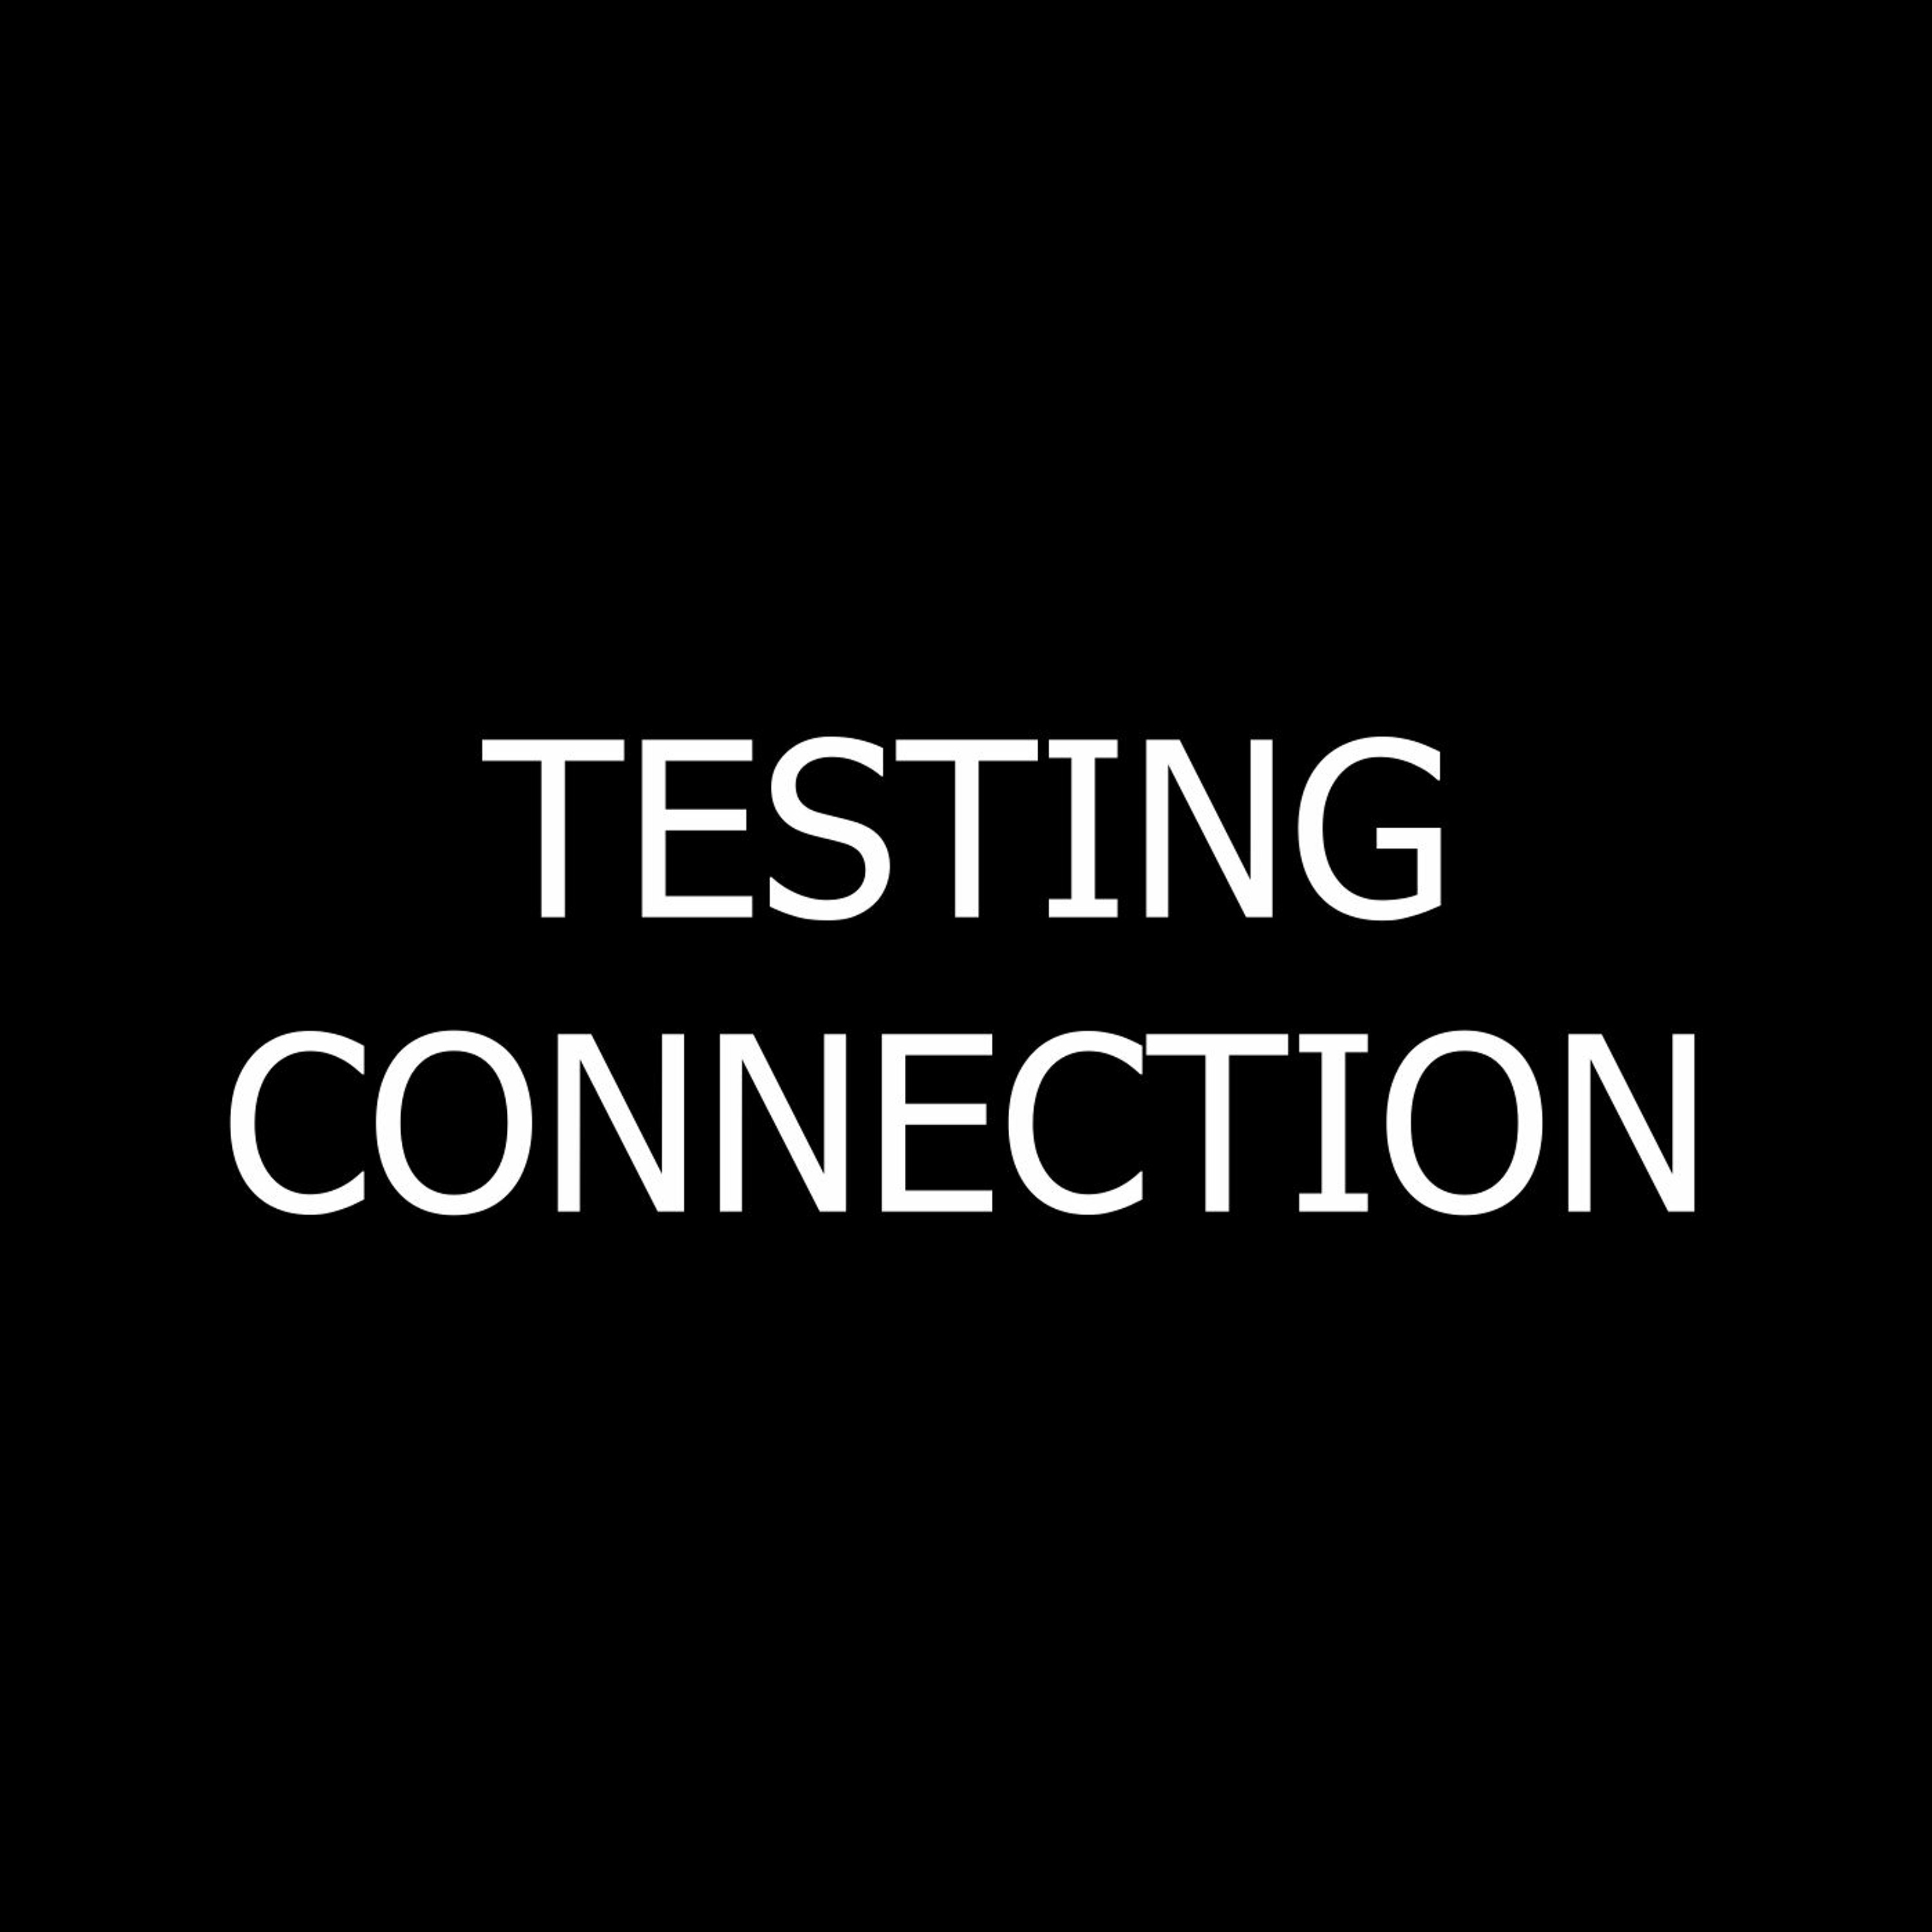 Testing Connection - 04